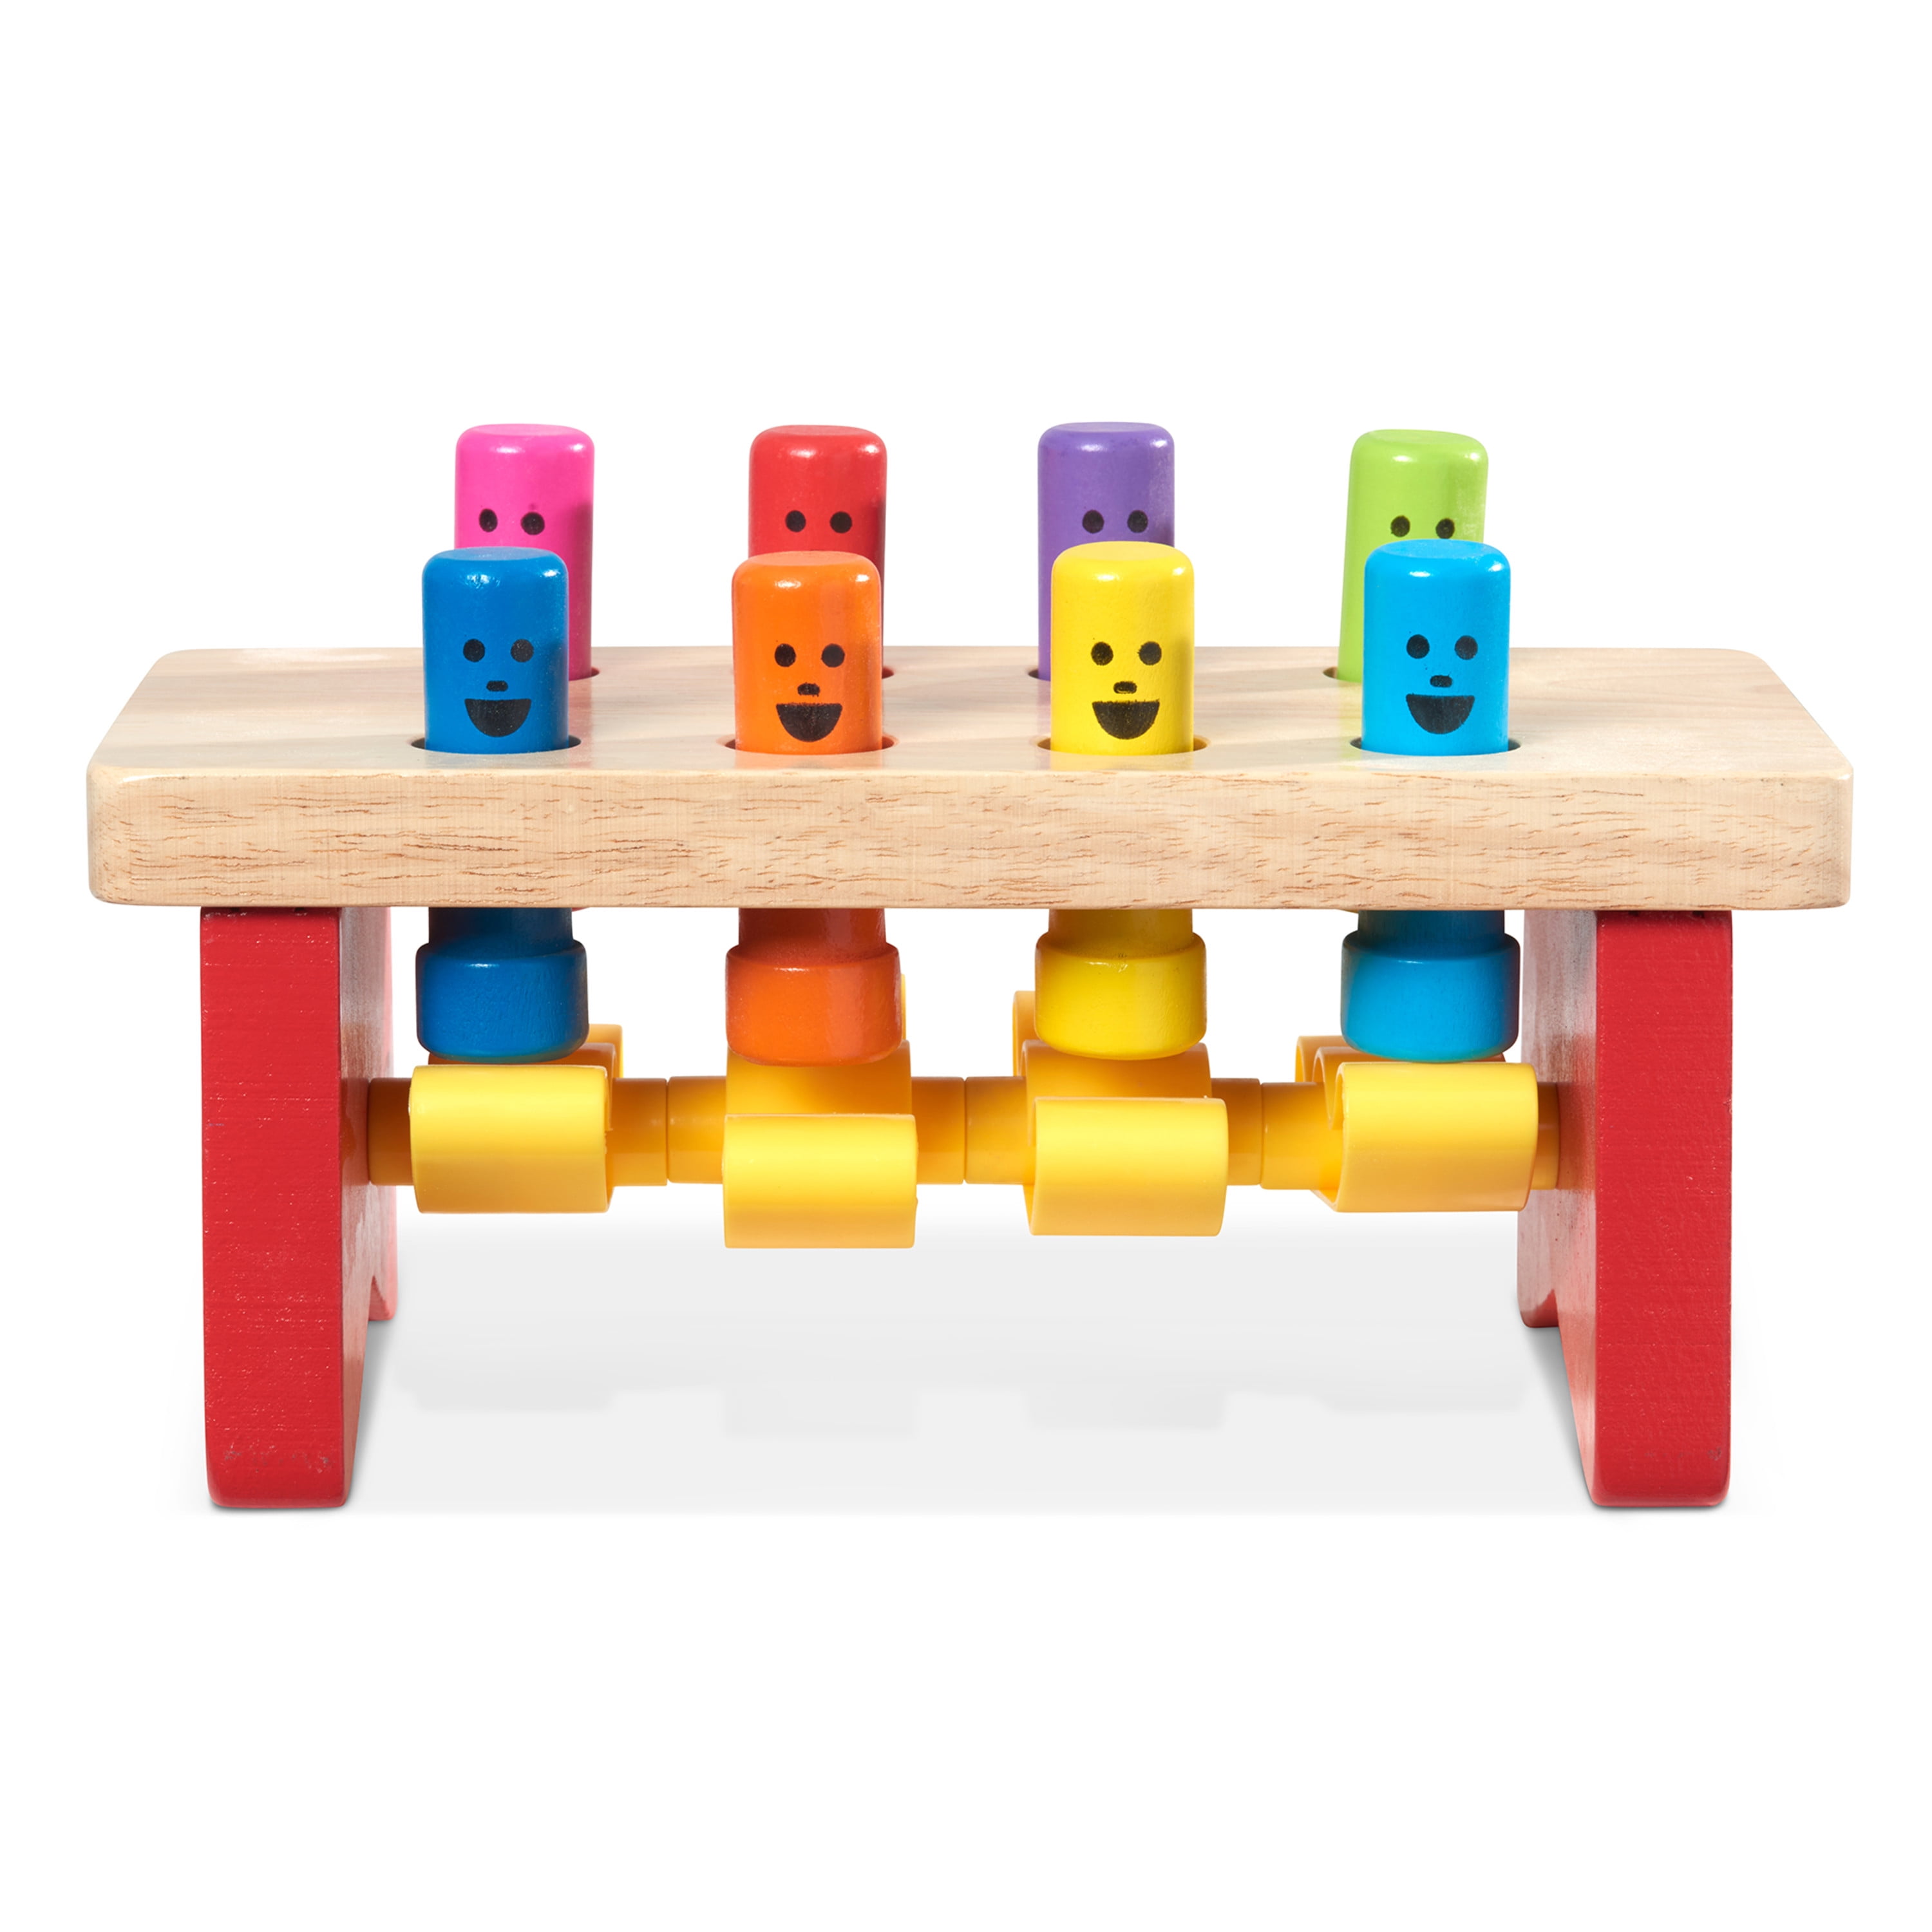 Joyshare Pounding Bench Wooden Toy With Mallet Hammering Block Punch and Drop in for sale online 